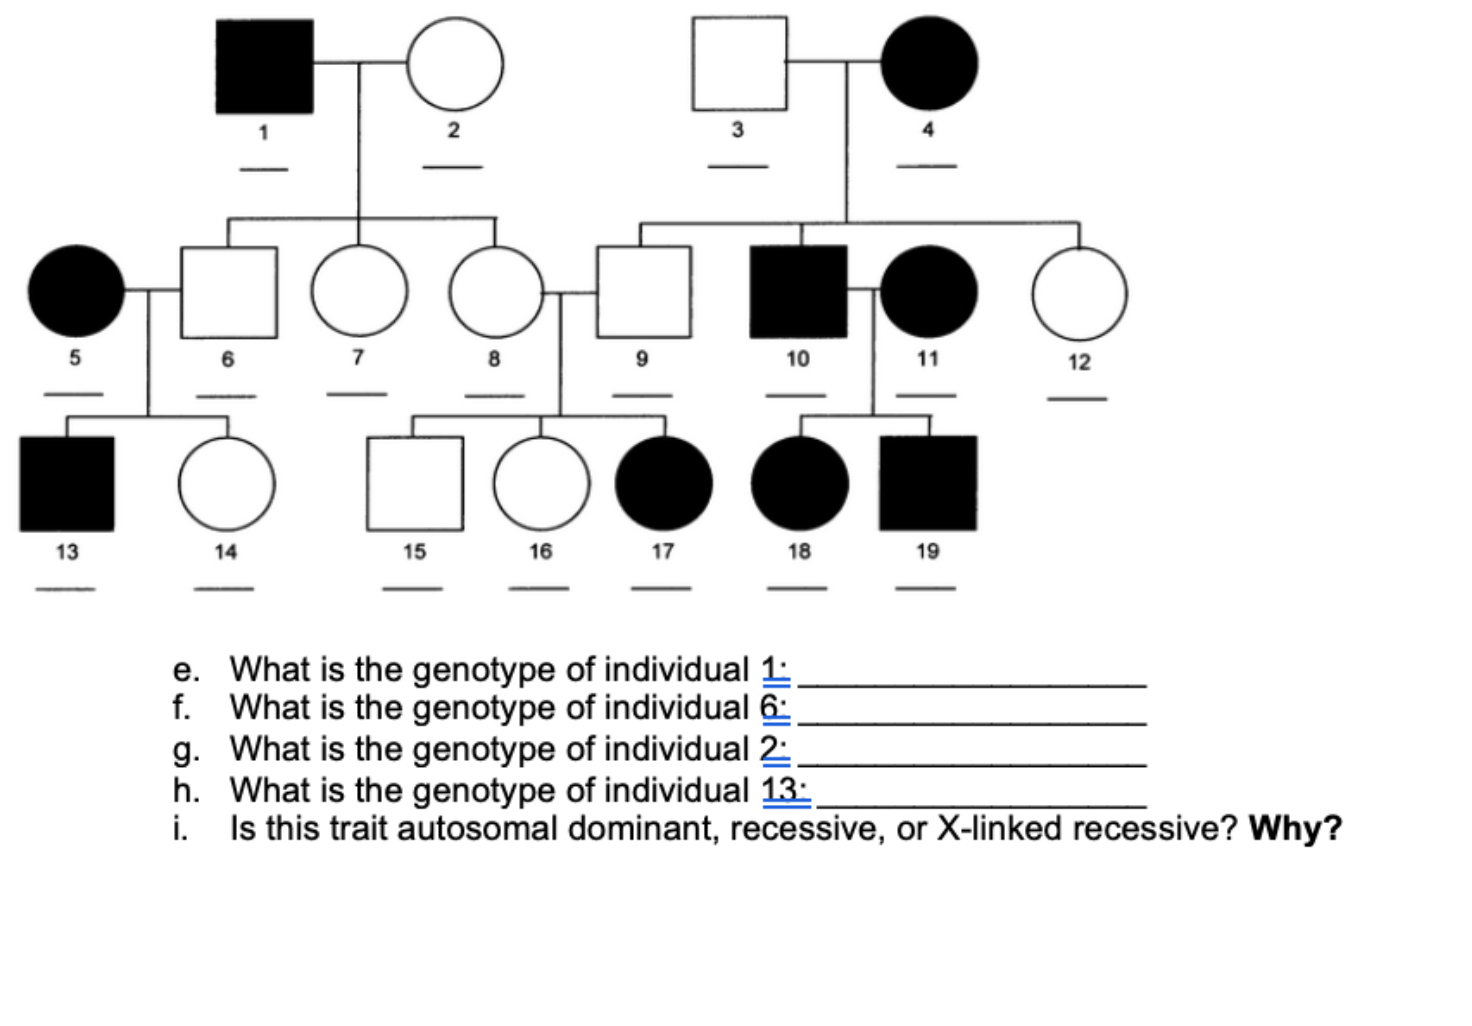 e. What is the genotype of individual 1:
g. What is the genotype of individual 2:
h. What is the genotype of individual 13:
Is this trait autosomal dominant, recessive, or X-linked recessive? Why?
